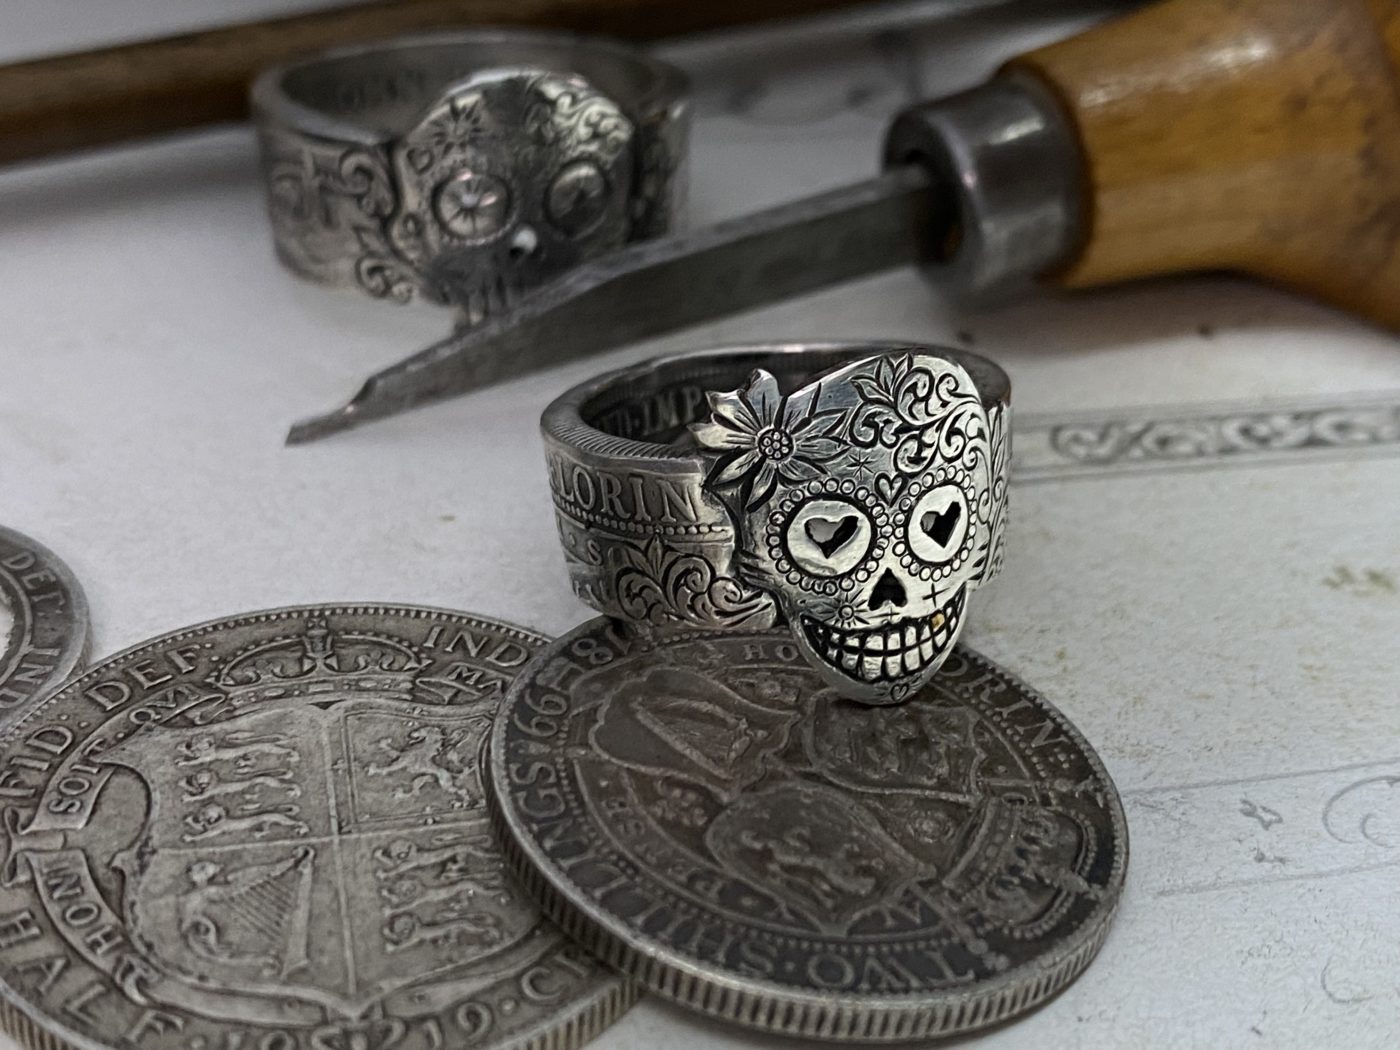 Day of the dead ring. Handmade, repurposed, upcycled, original silver coin day of the dead sugar skull rings